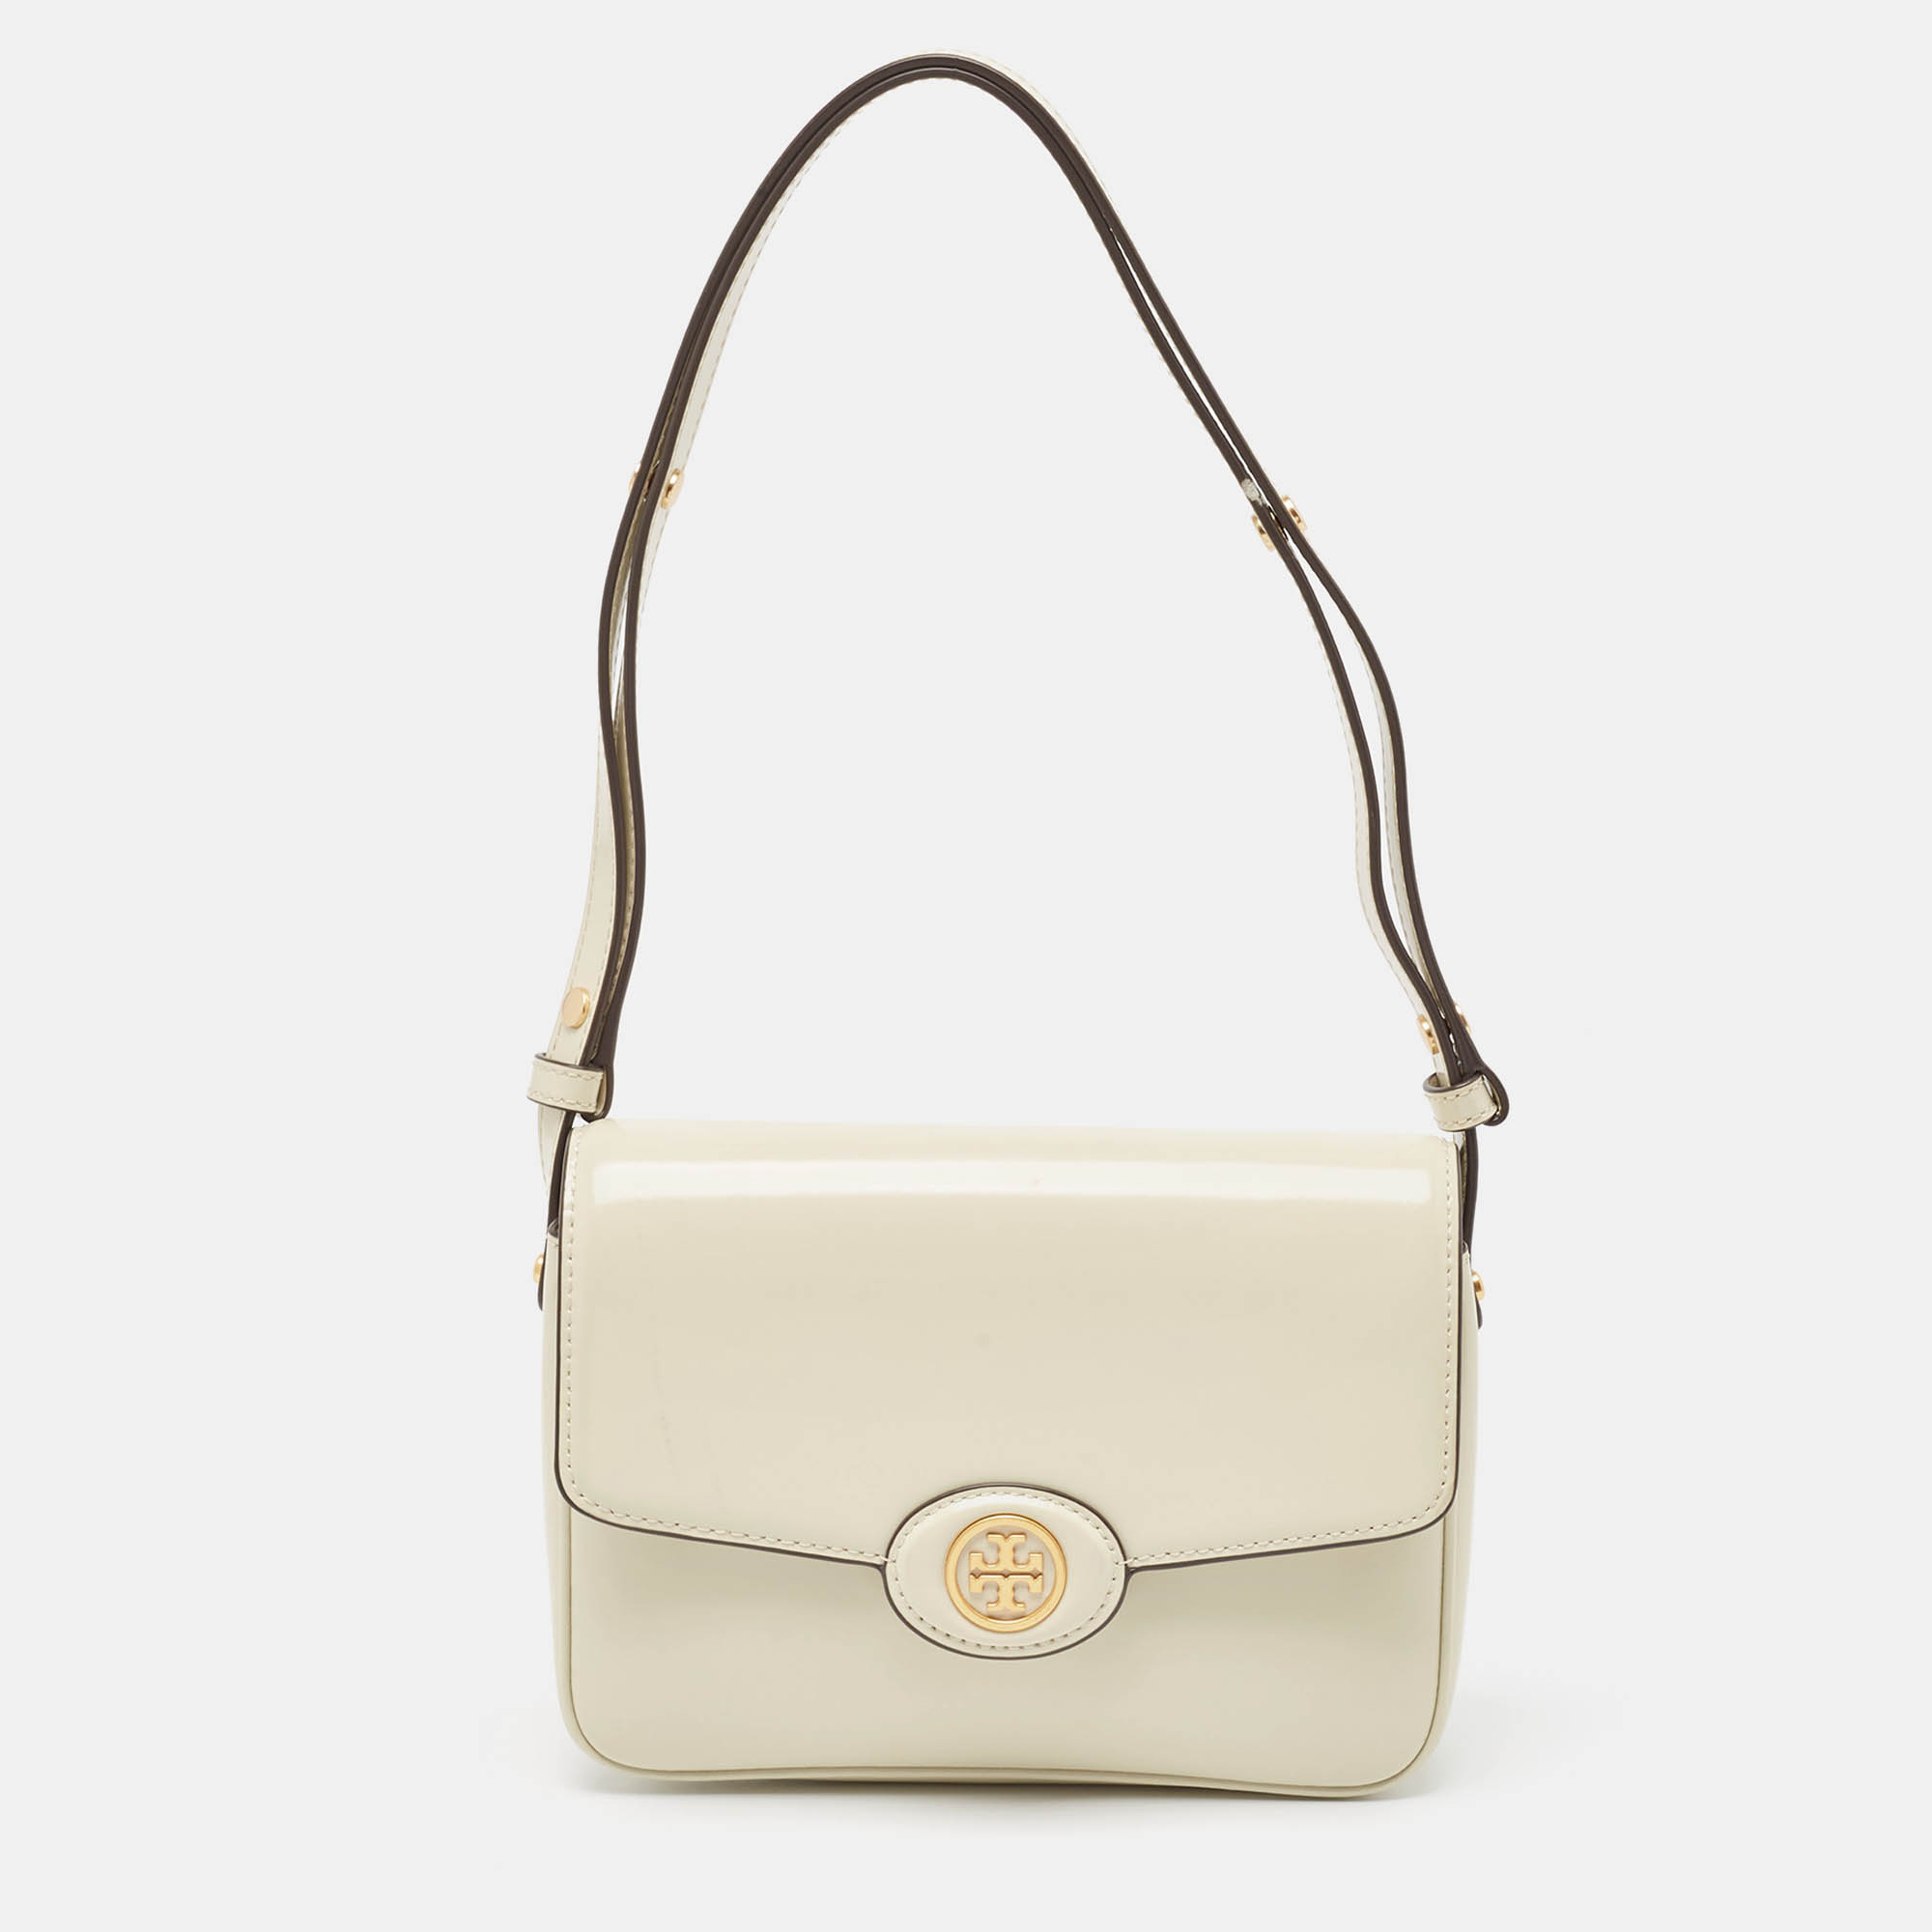 Tory burch off white patent leather robinson spazzolato shoulder bag